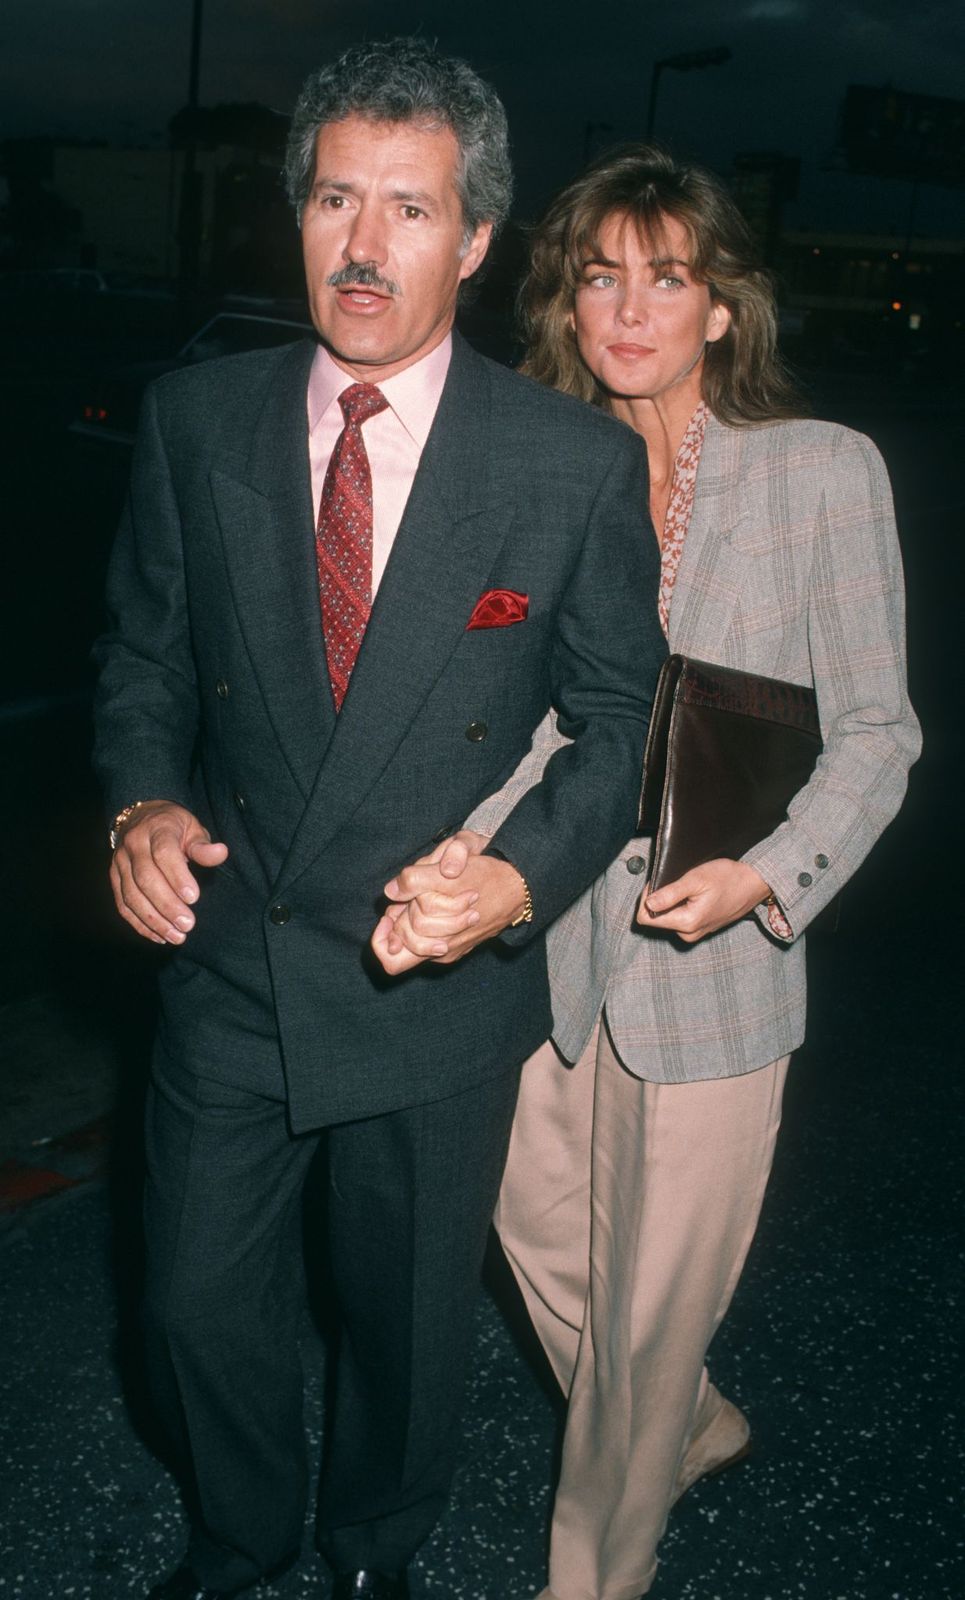 Alex and Jean Trebek at the opening of "Jackie Mason" on May 30, 1990, in Los Angeles, California | Photo: Ron Galella, Ltd./Ron Galella Collection/Getty Images